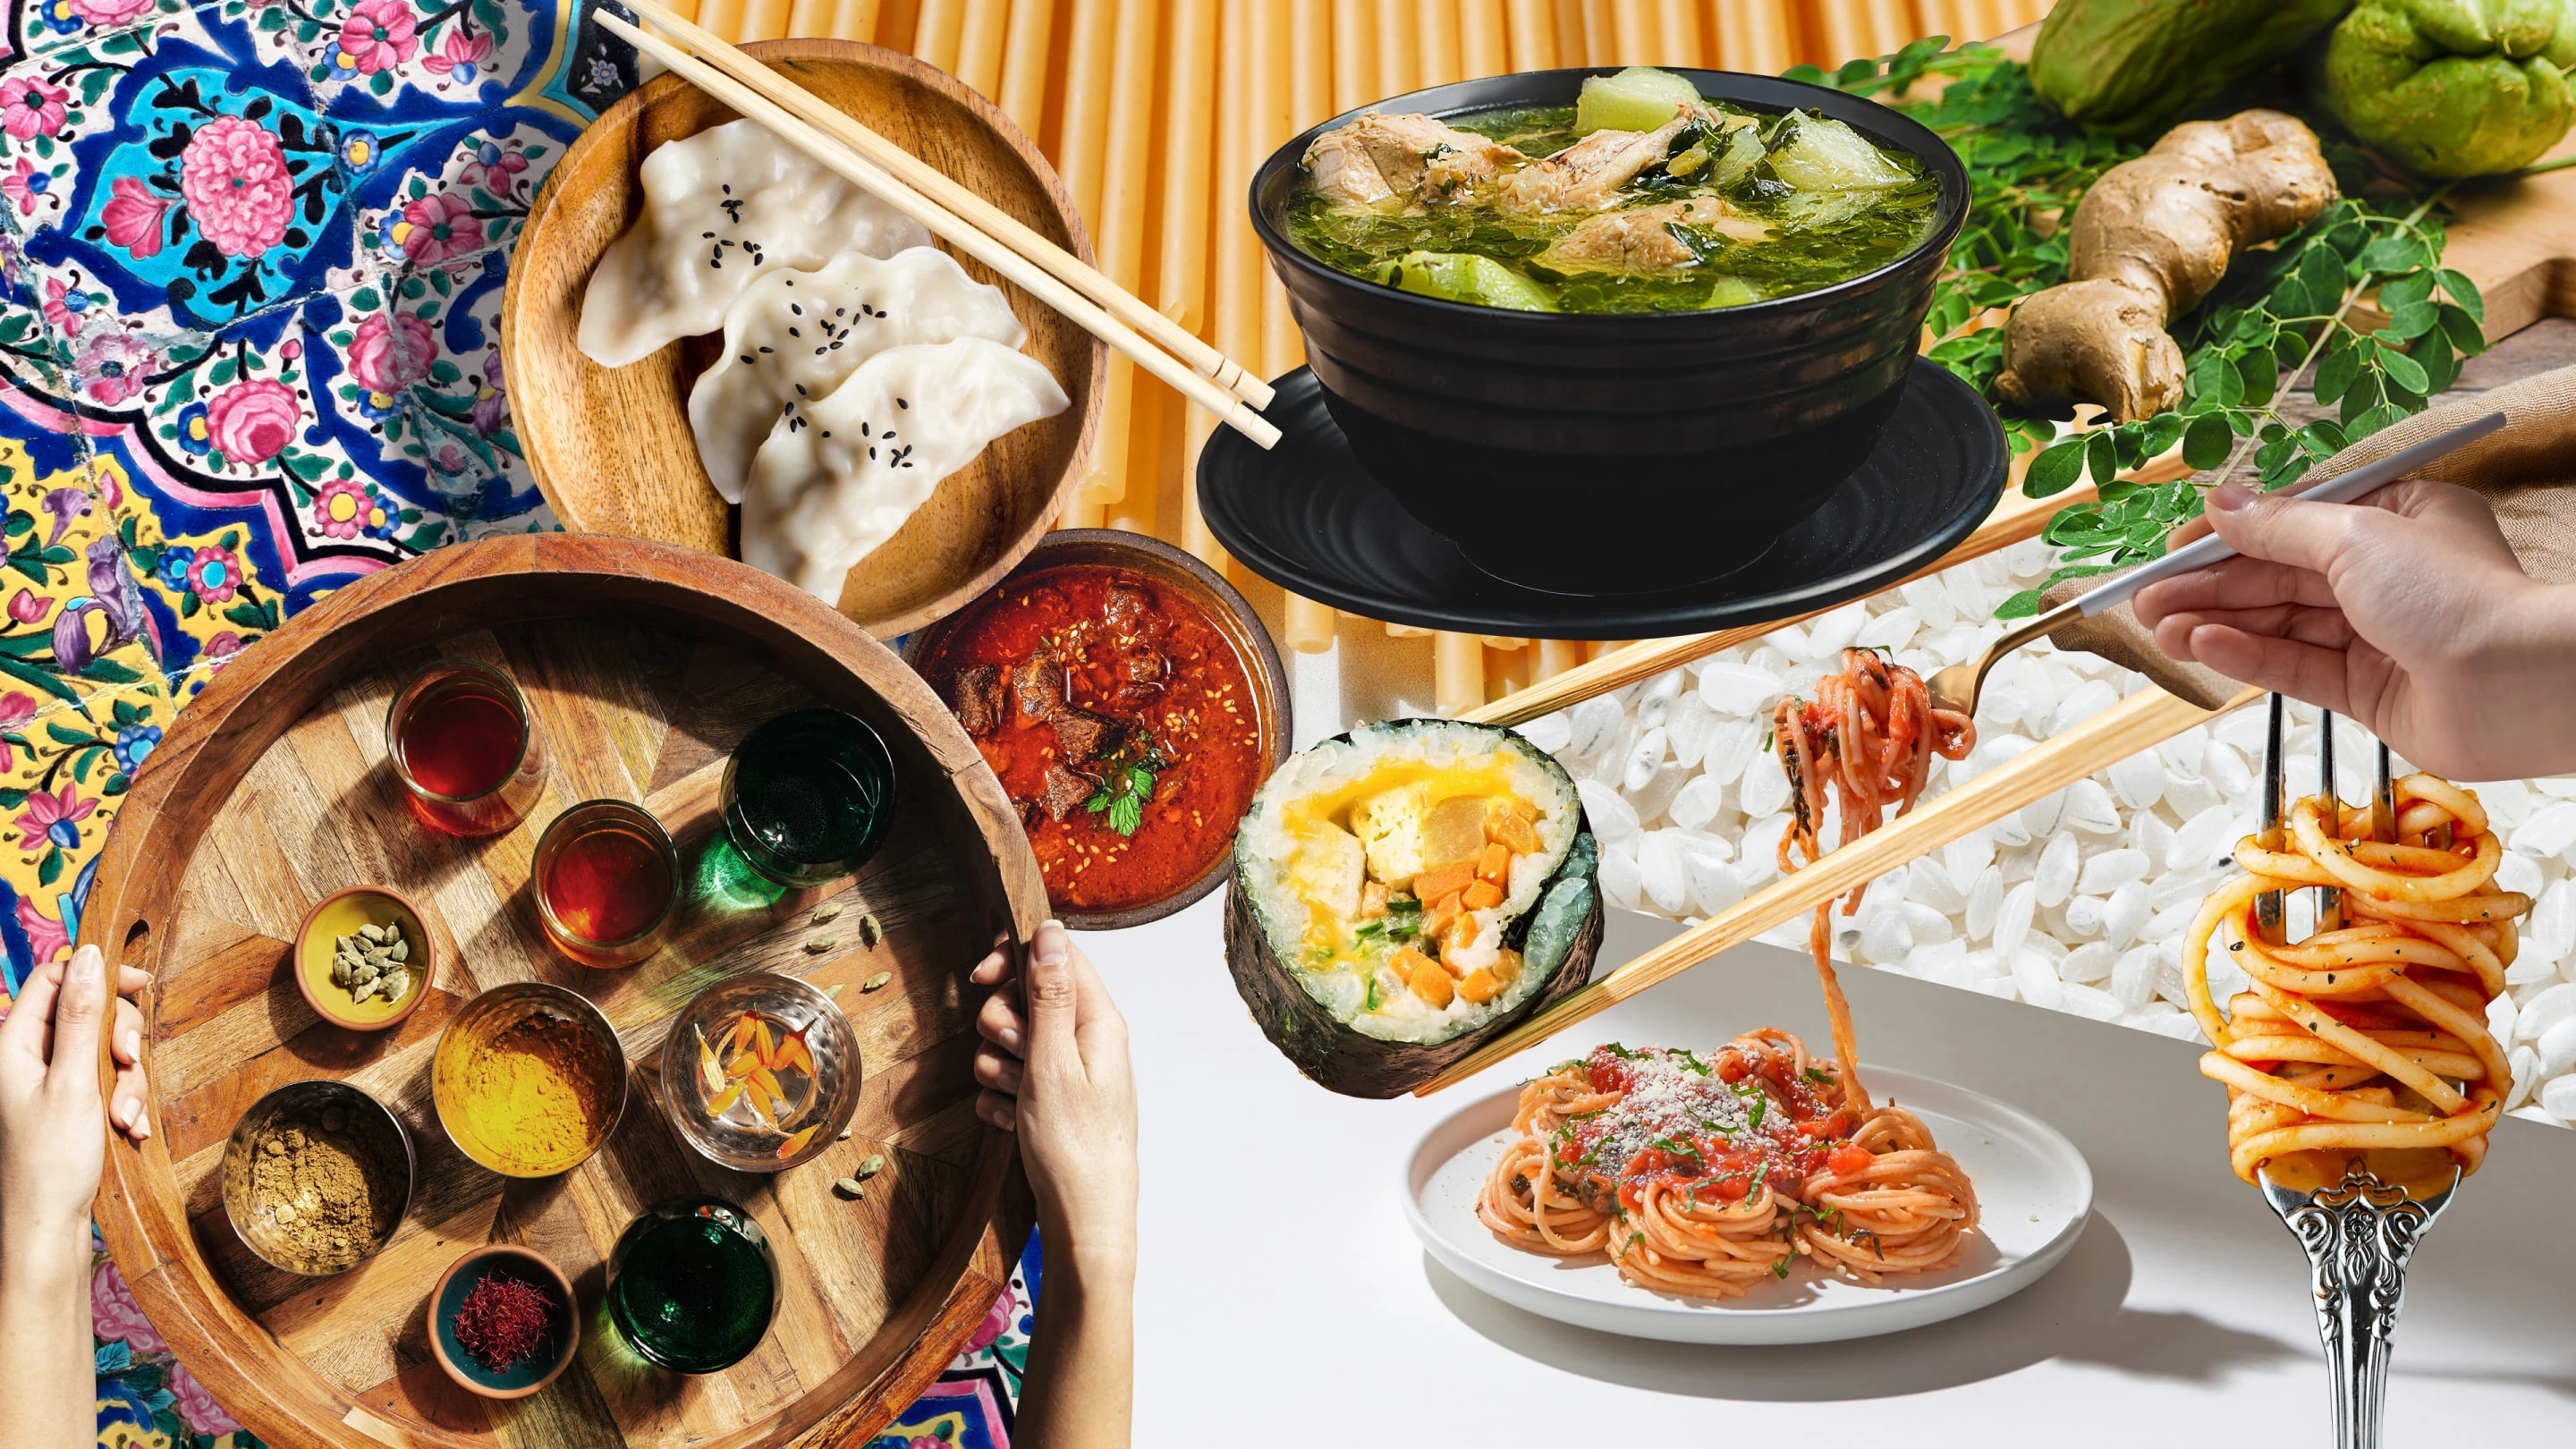 Colourful collage of meals. Dumplings on a brown, wooden plate with chopsticks, a maki sushi roll, a plate of spaghetti and a fork with spaghetti rolled around it, a brown tray of oils and spices and a large blue bowl of chicken and vegetable soup.